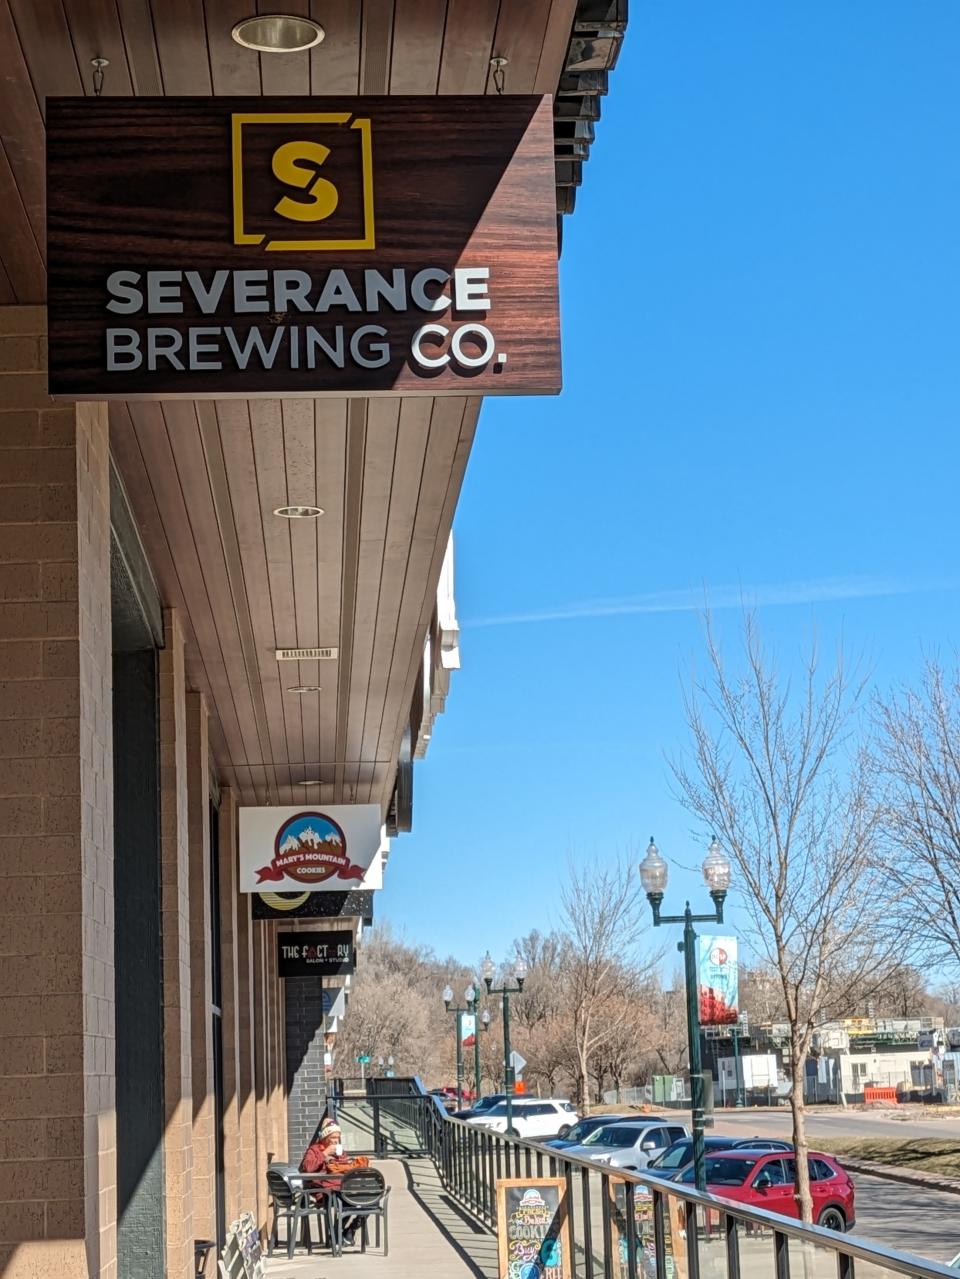 Severance Brewing at The Cascade in Downtown Sioux Falls.